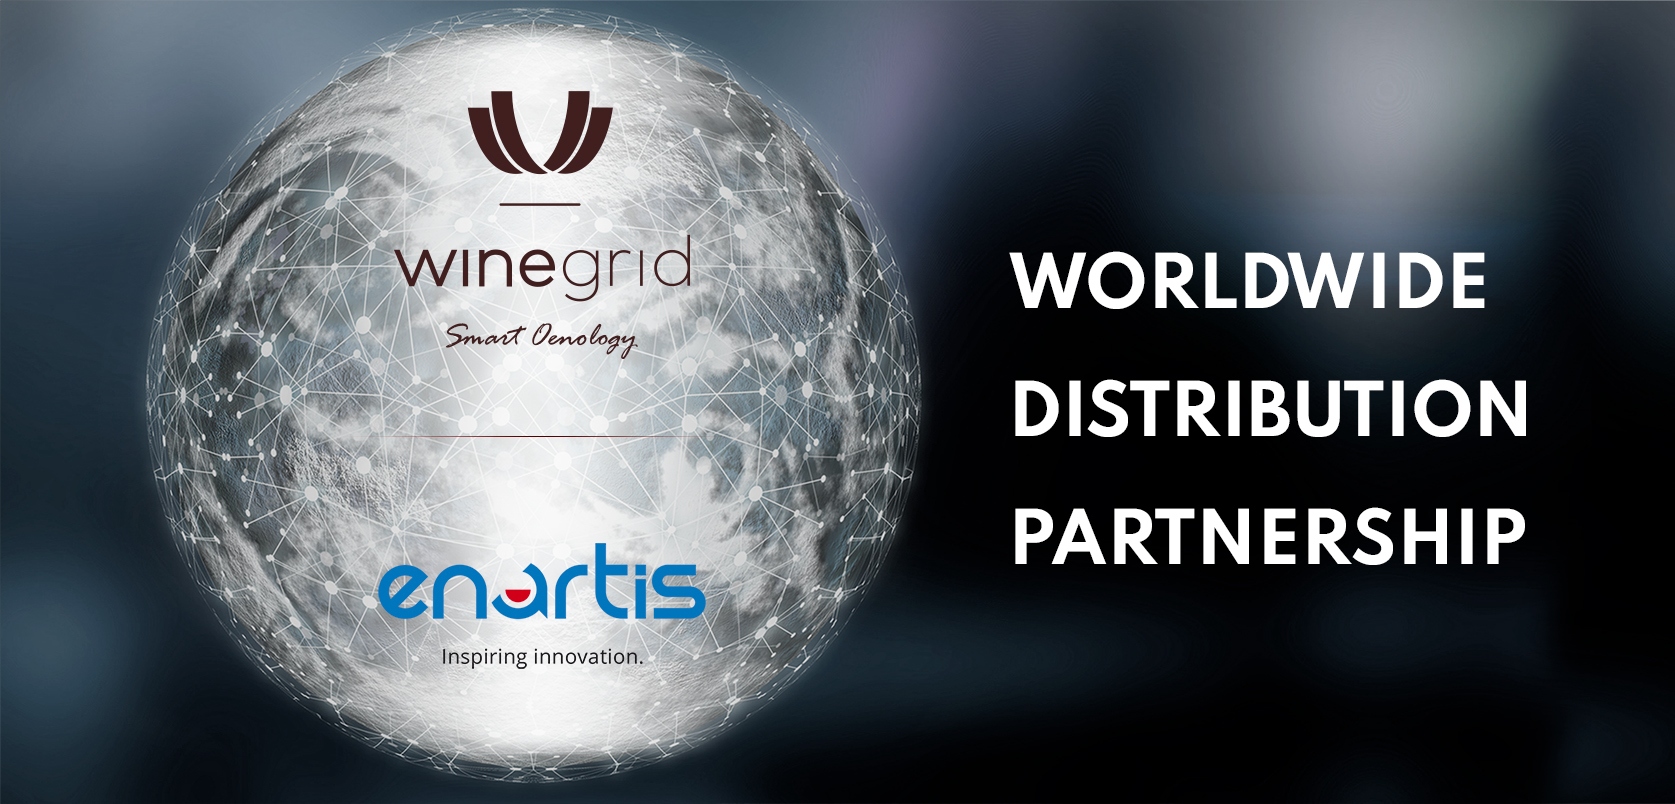 WINEGRID announces a worldwide distribution partnership with Enartis